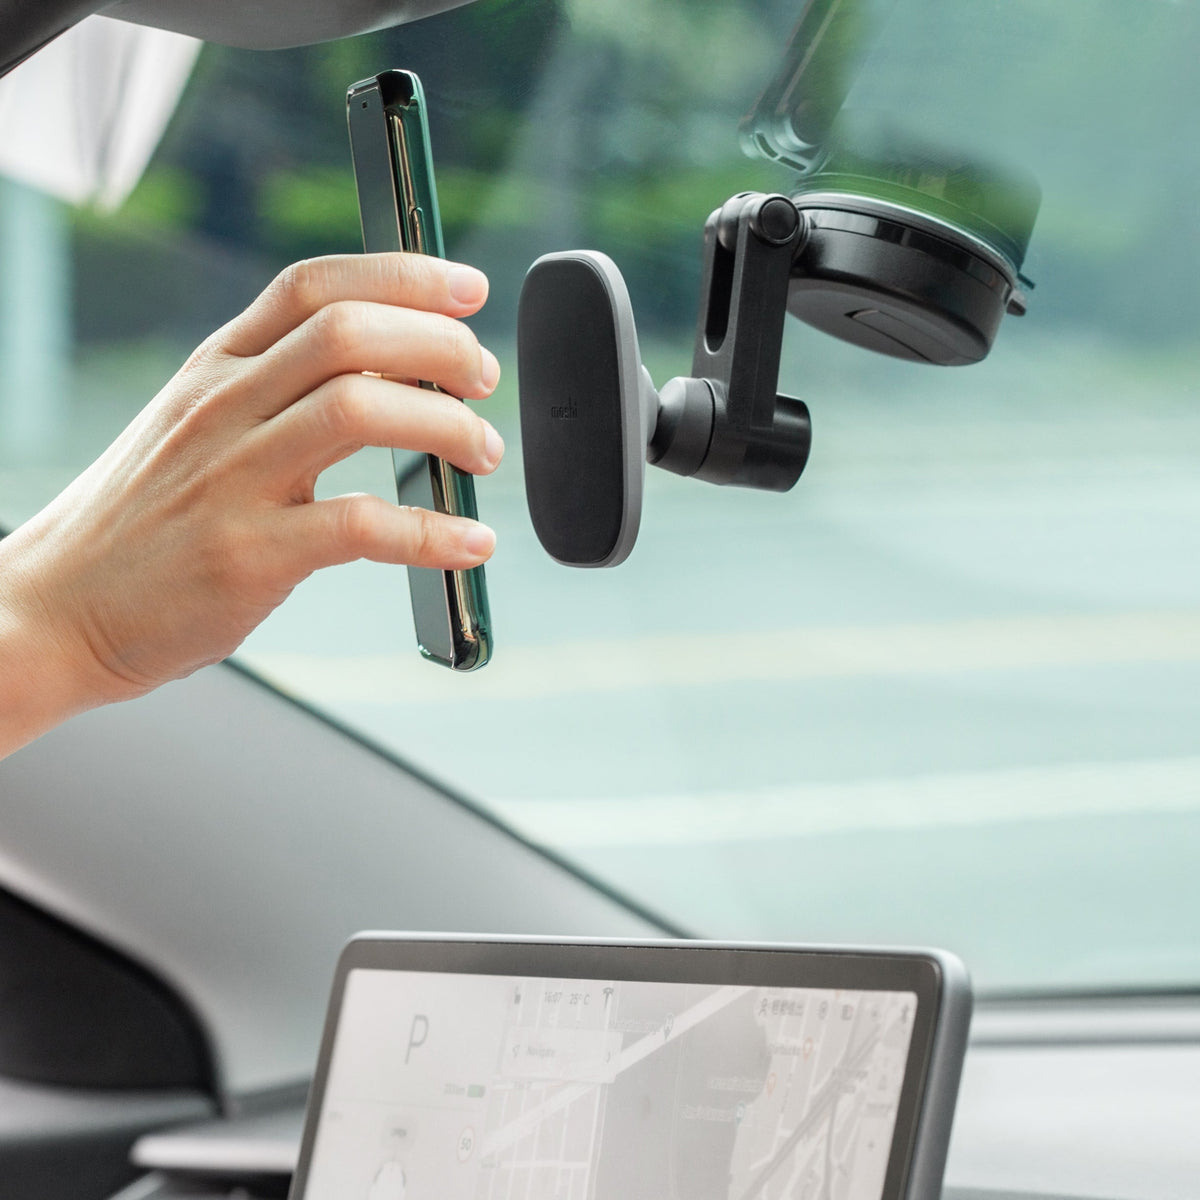 [OPEN BOX] MOSHI SnapTo Universal Car Mount with Wireless Charging - Black